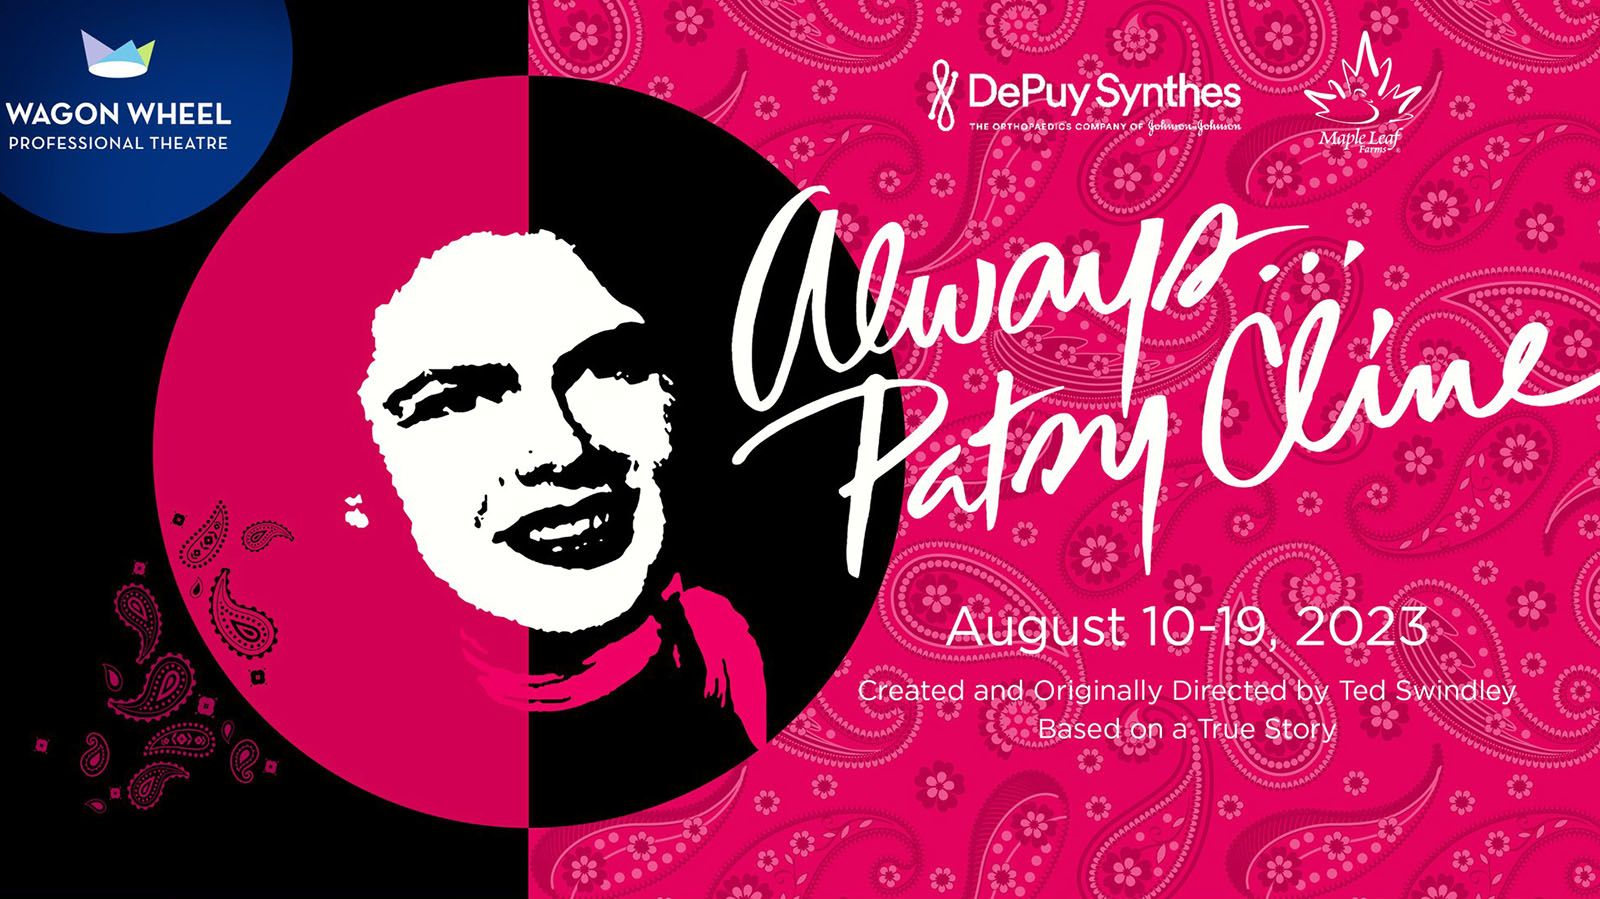 "Always ... Patsy Cline" run from Aug. 10-19 at Wagon Wheel Theatre in Warsaw.